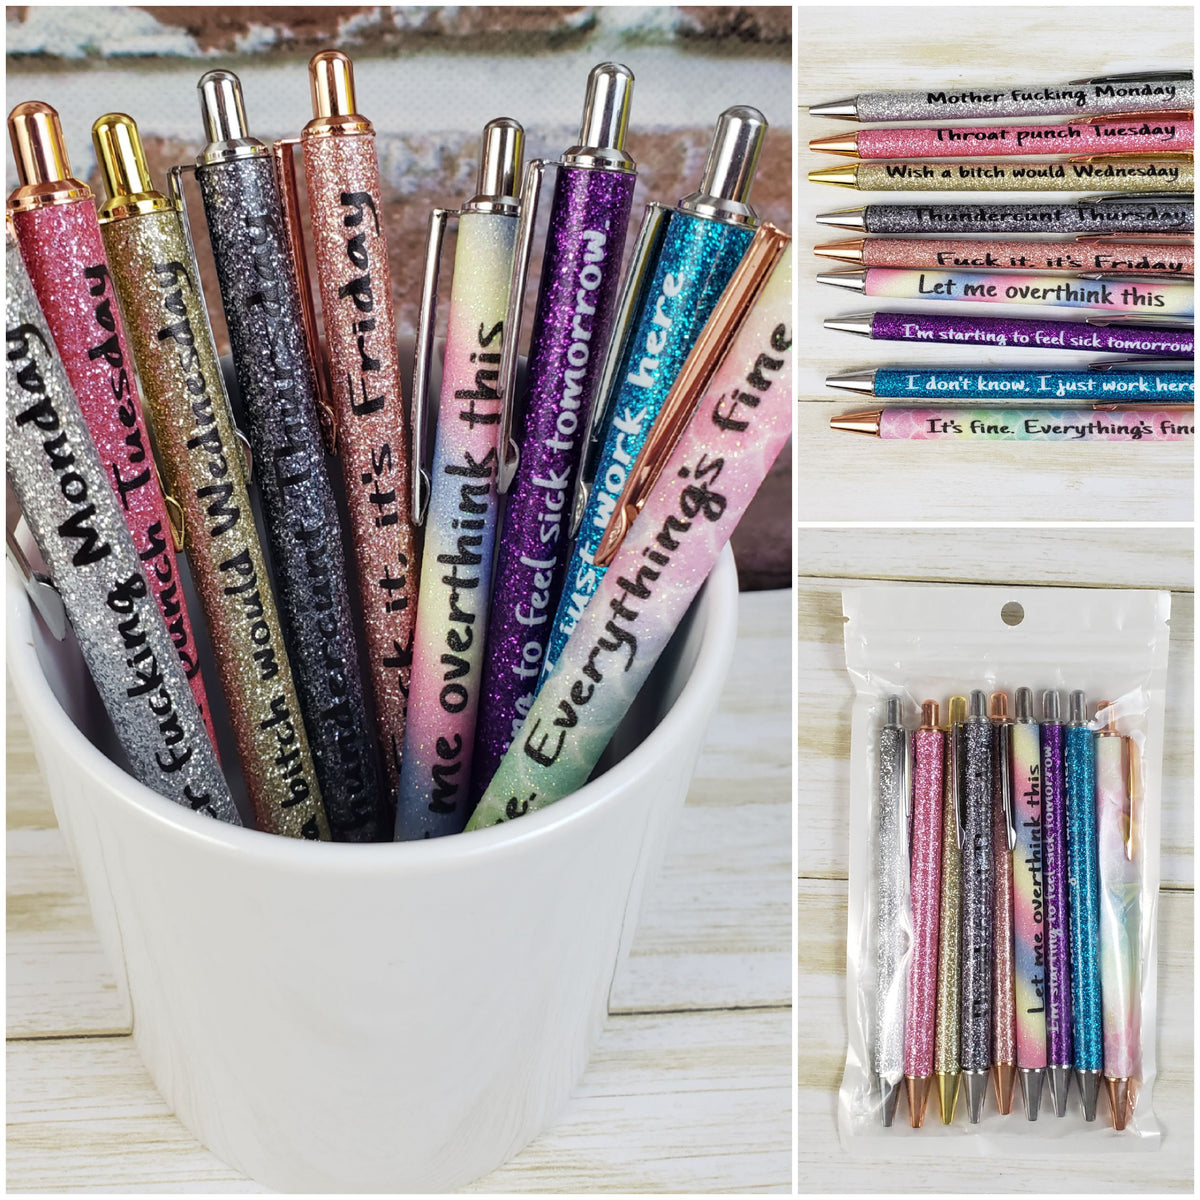 Weekday Swear Word Glitter Metal Pens - 7 pieces - Beware - offensive –  Bits and Pieces MO